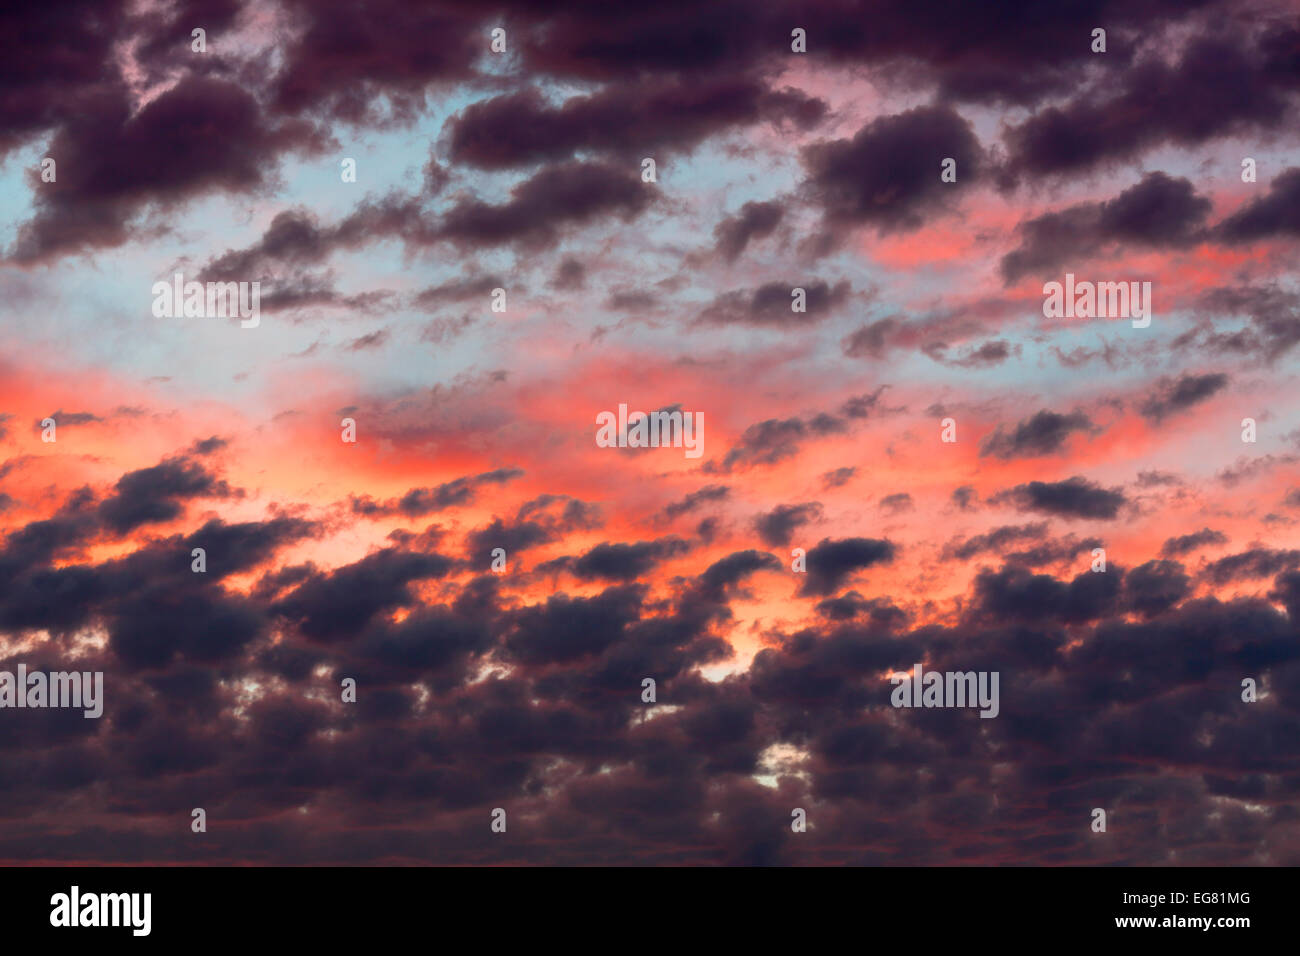 Clouds on sunset sky, background Stock Photo